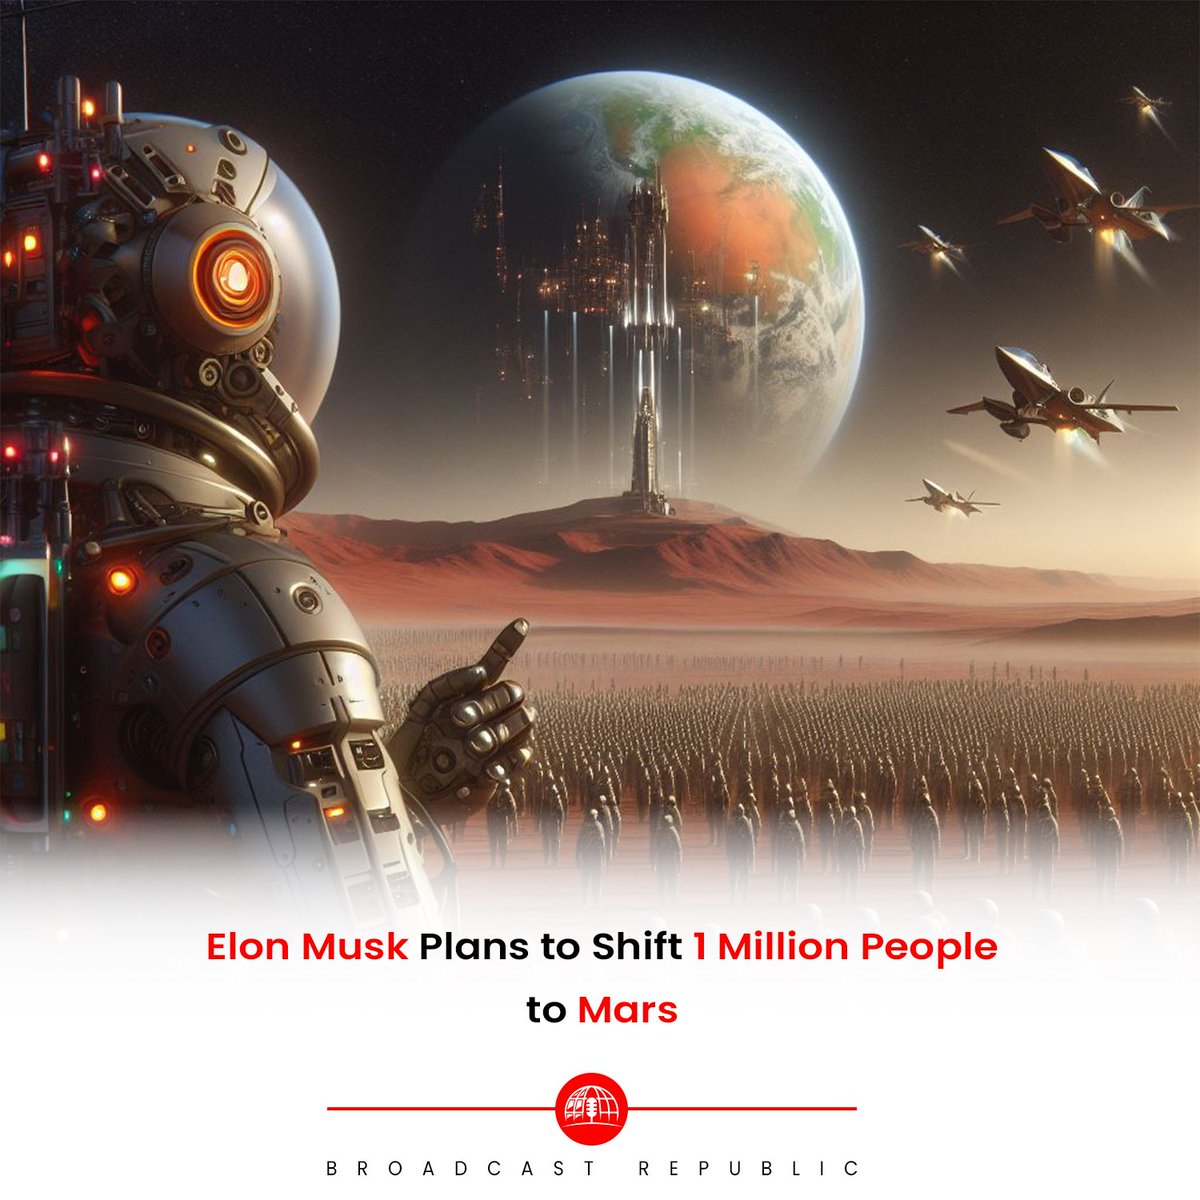 Elon Musk, founder of SpaceX, has outlined his ambitious vision to transport one million people to Mars, emphasizing the need to establish a civilization on the Red Planet as a contingency for unforeseen events on Earth. 

#BroadcastRepublic #ElonMusk #SpaceX #MarsColonization